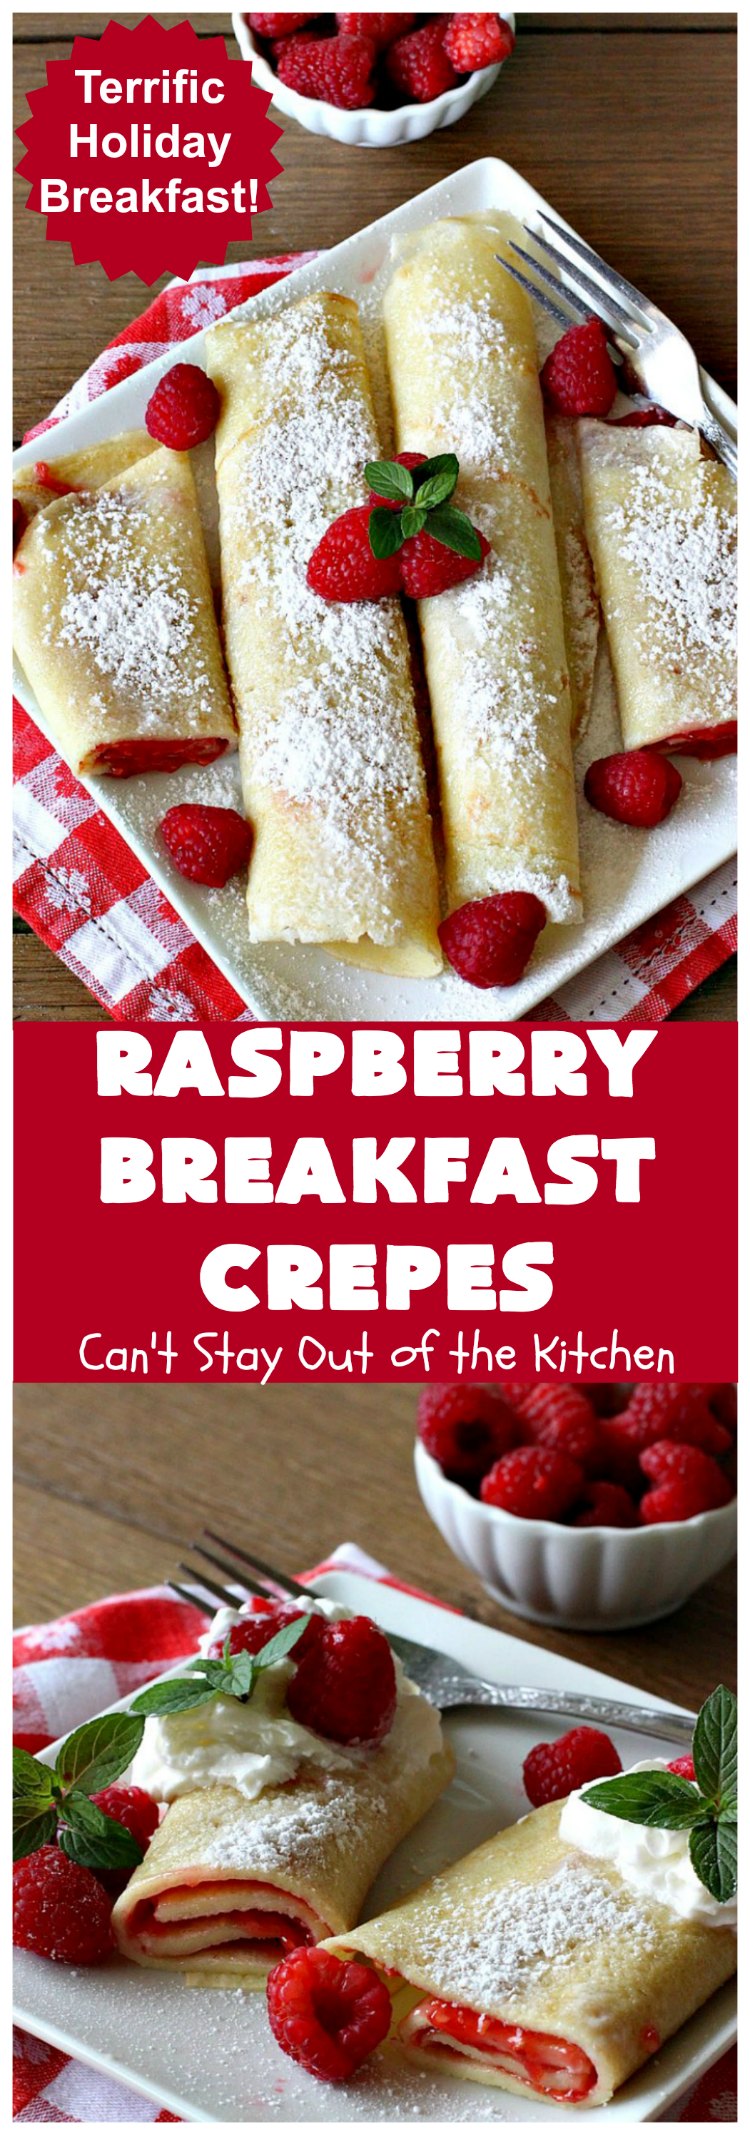 Raspberry Breakfast Crepes | Can't Stay Out of the Kitchen